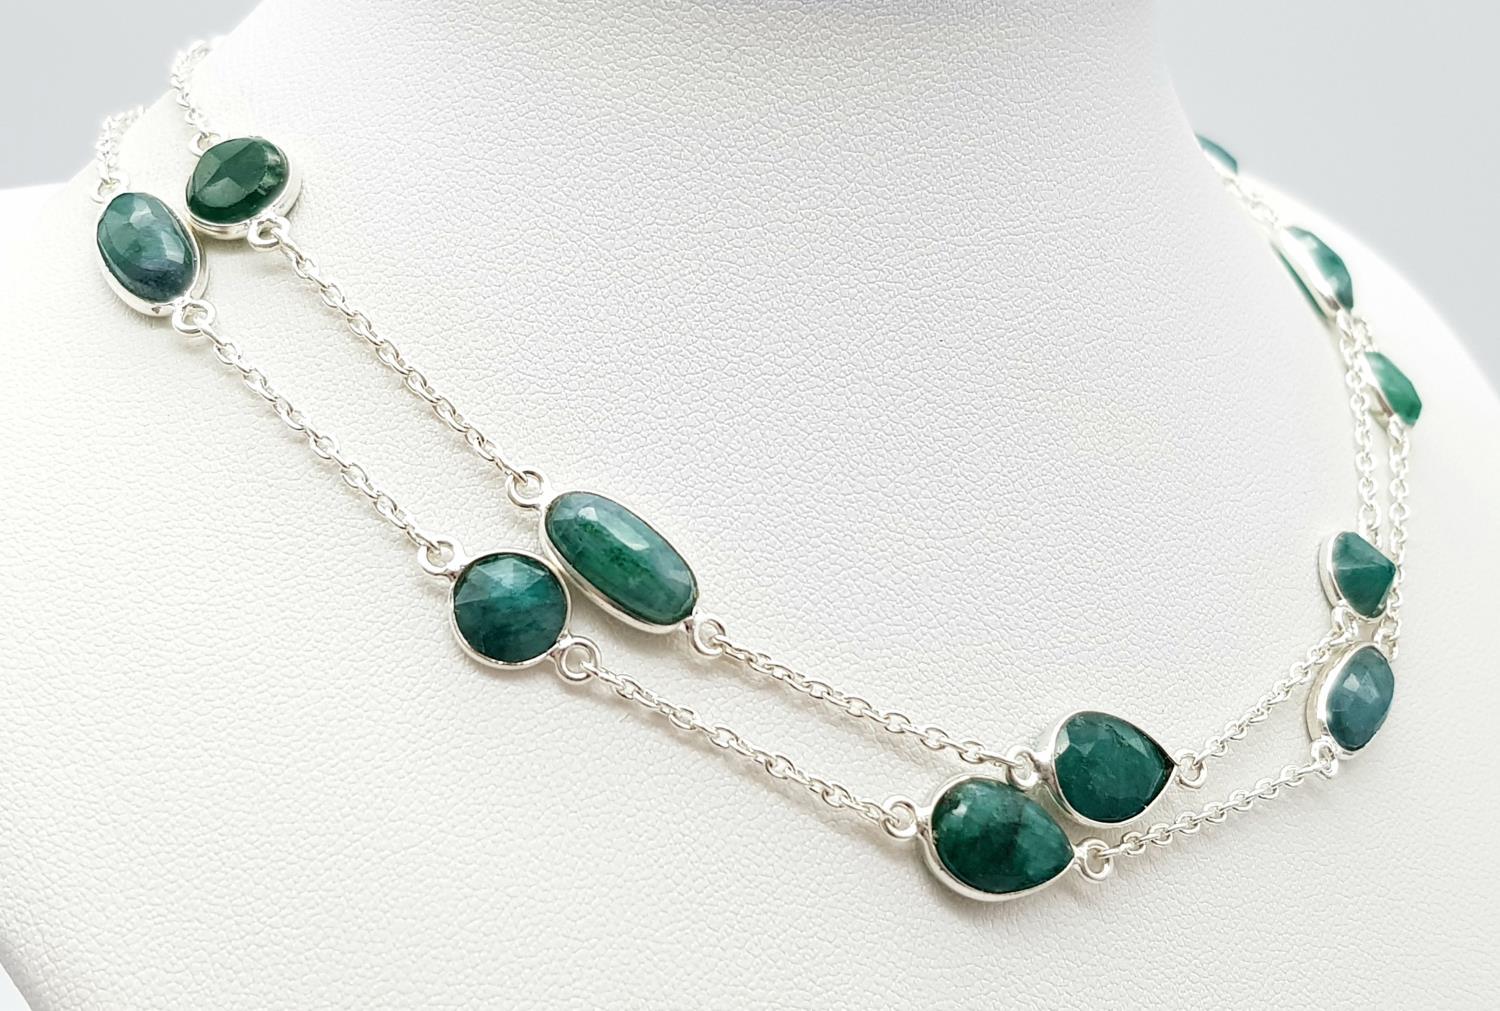 An Emerald Gemstone Long Chain necklace with Matching Drop Earrings. Set in 925 silver. 64cm - Image 5 of 5